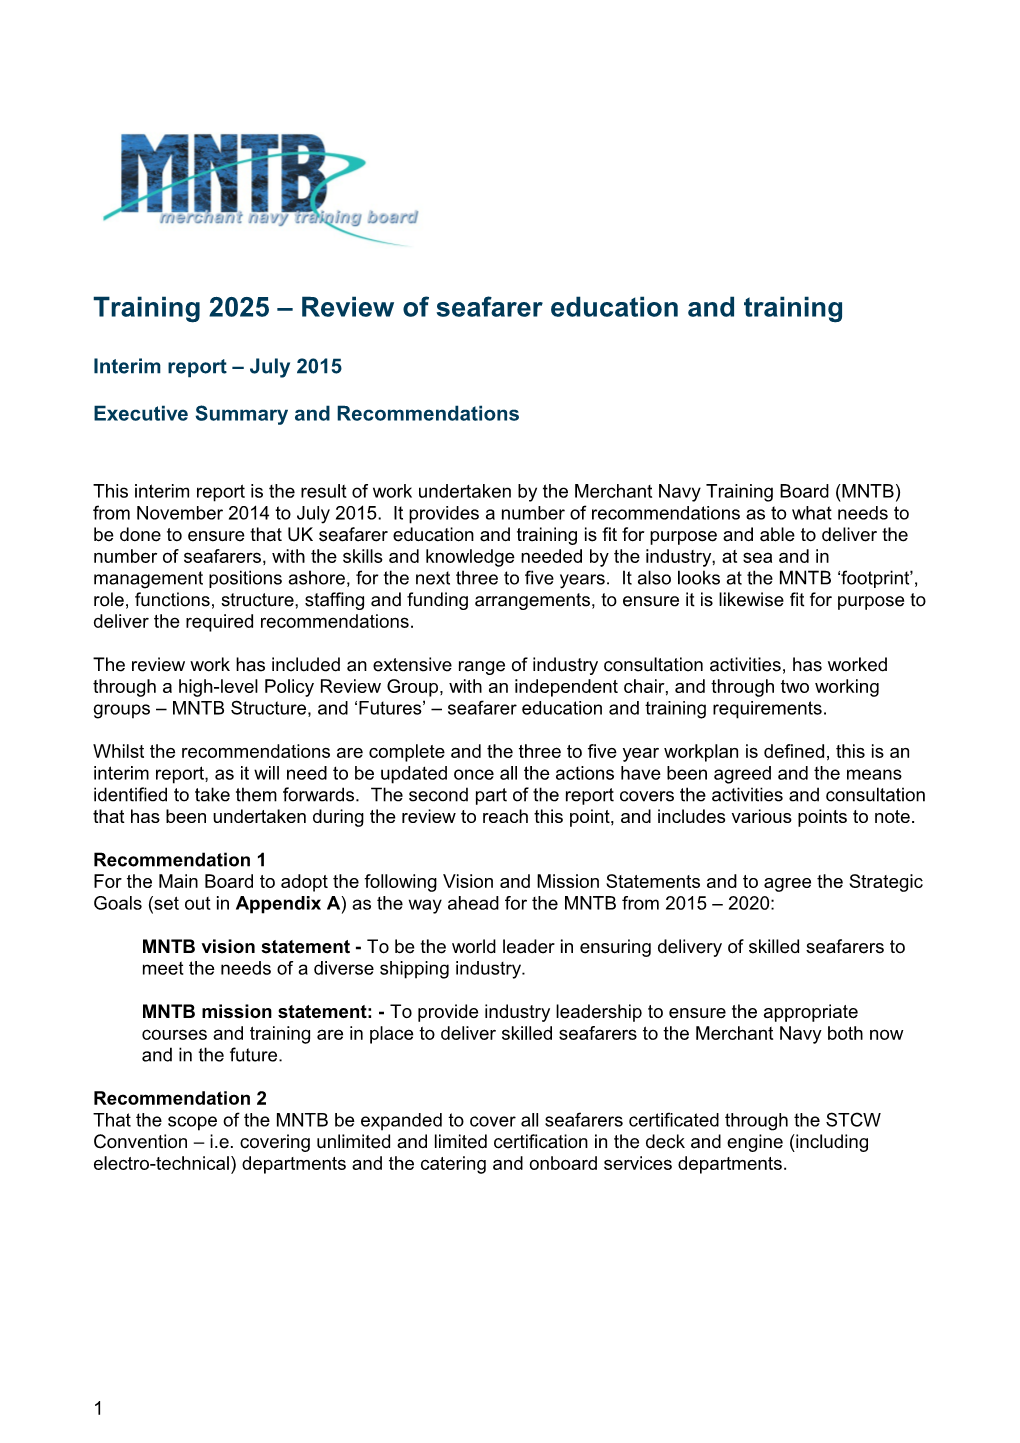 Training 2025 Review of Seafarer Education and Training